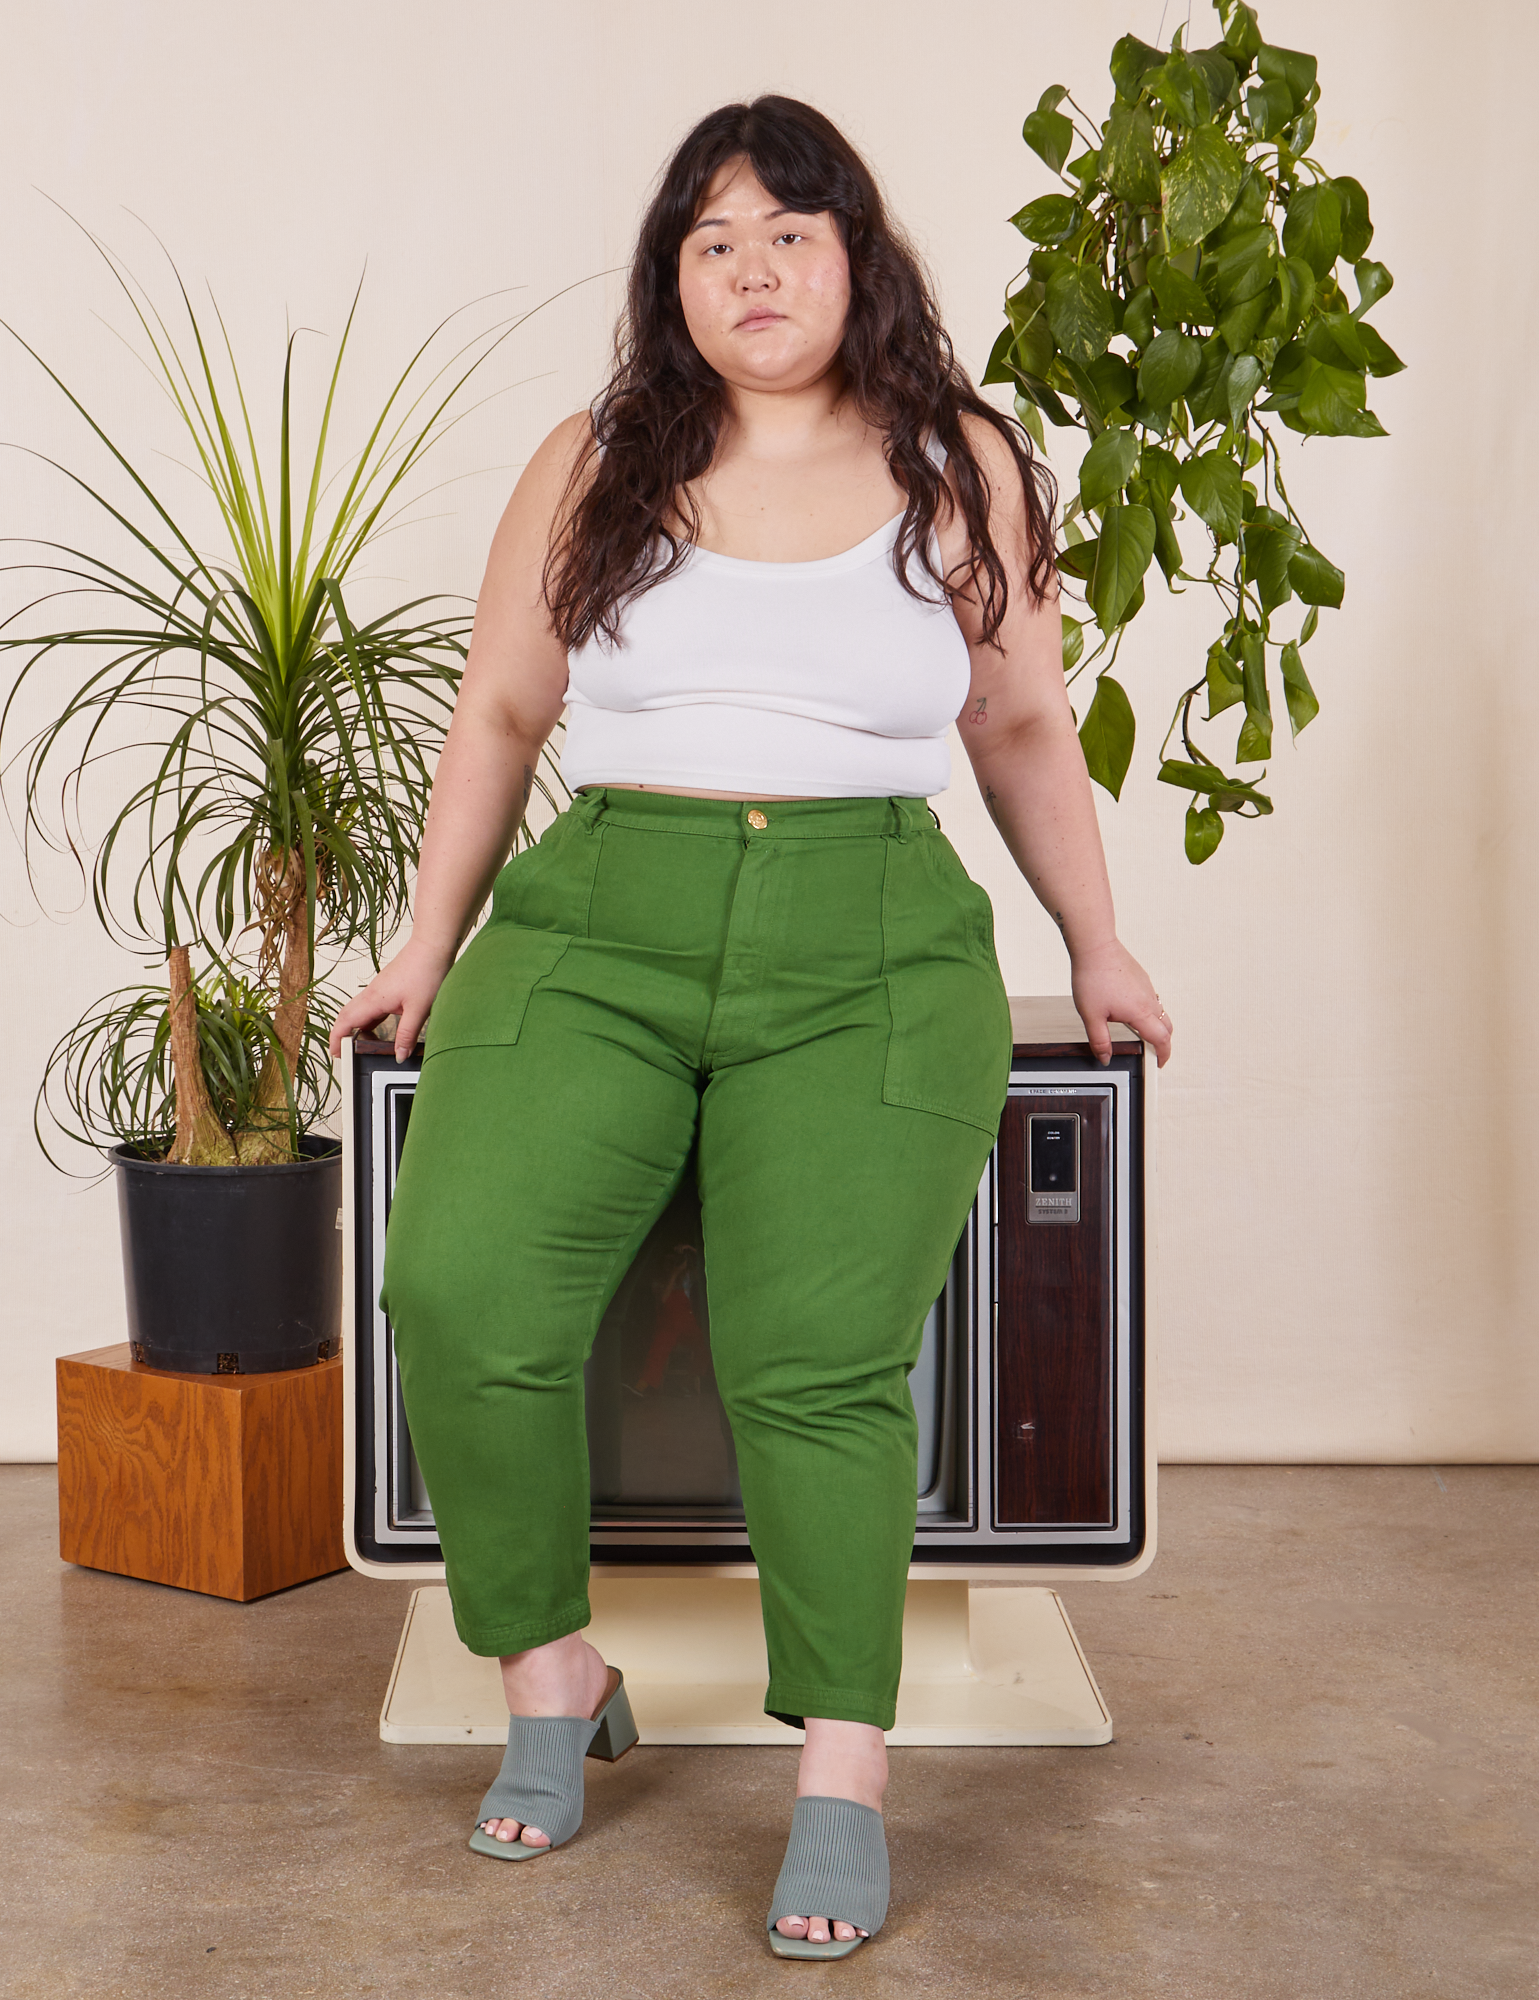 Ashley is wearing Petite Pencil Pants in Lawn Green and vintage off-white Cropped Cami